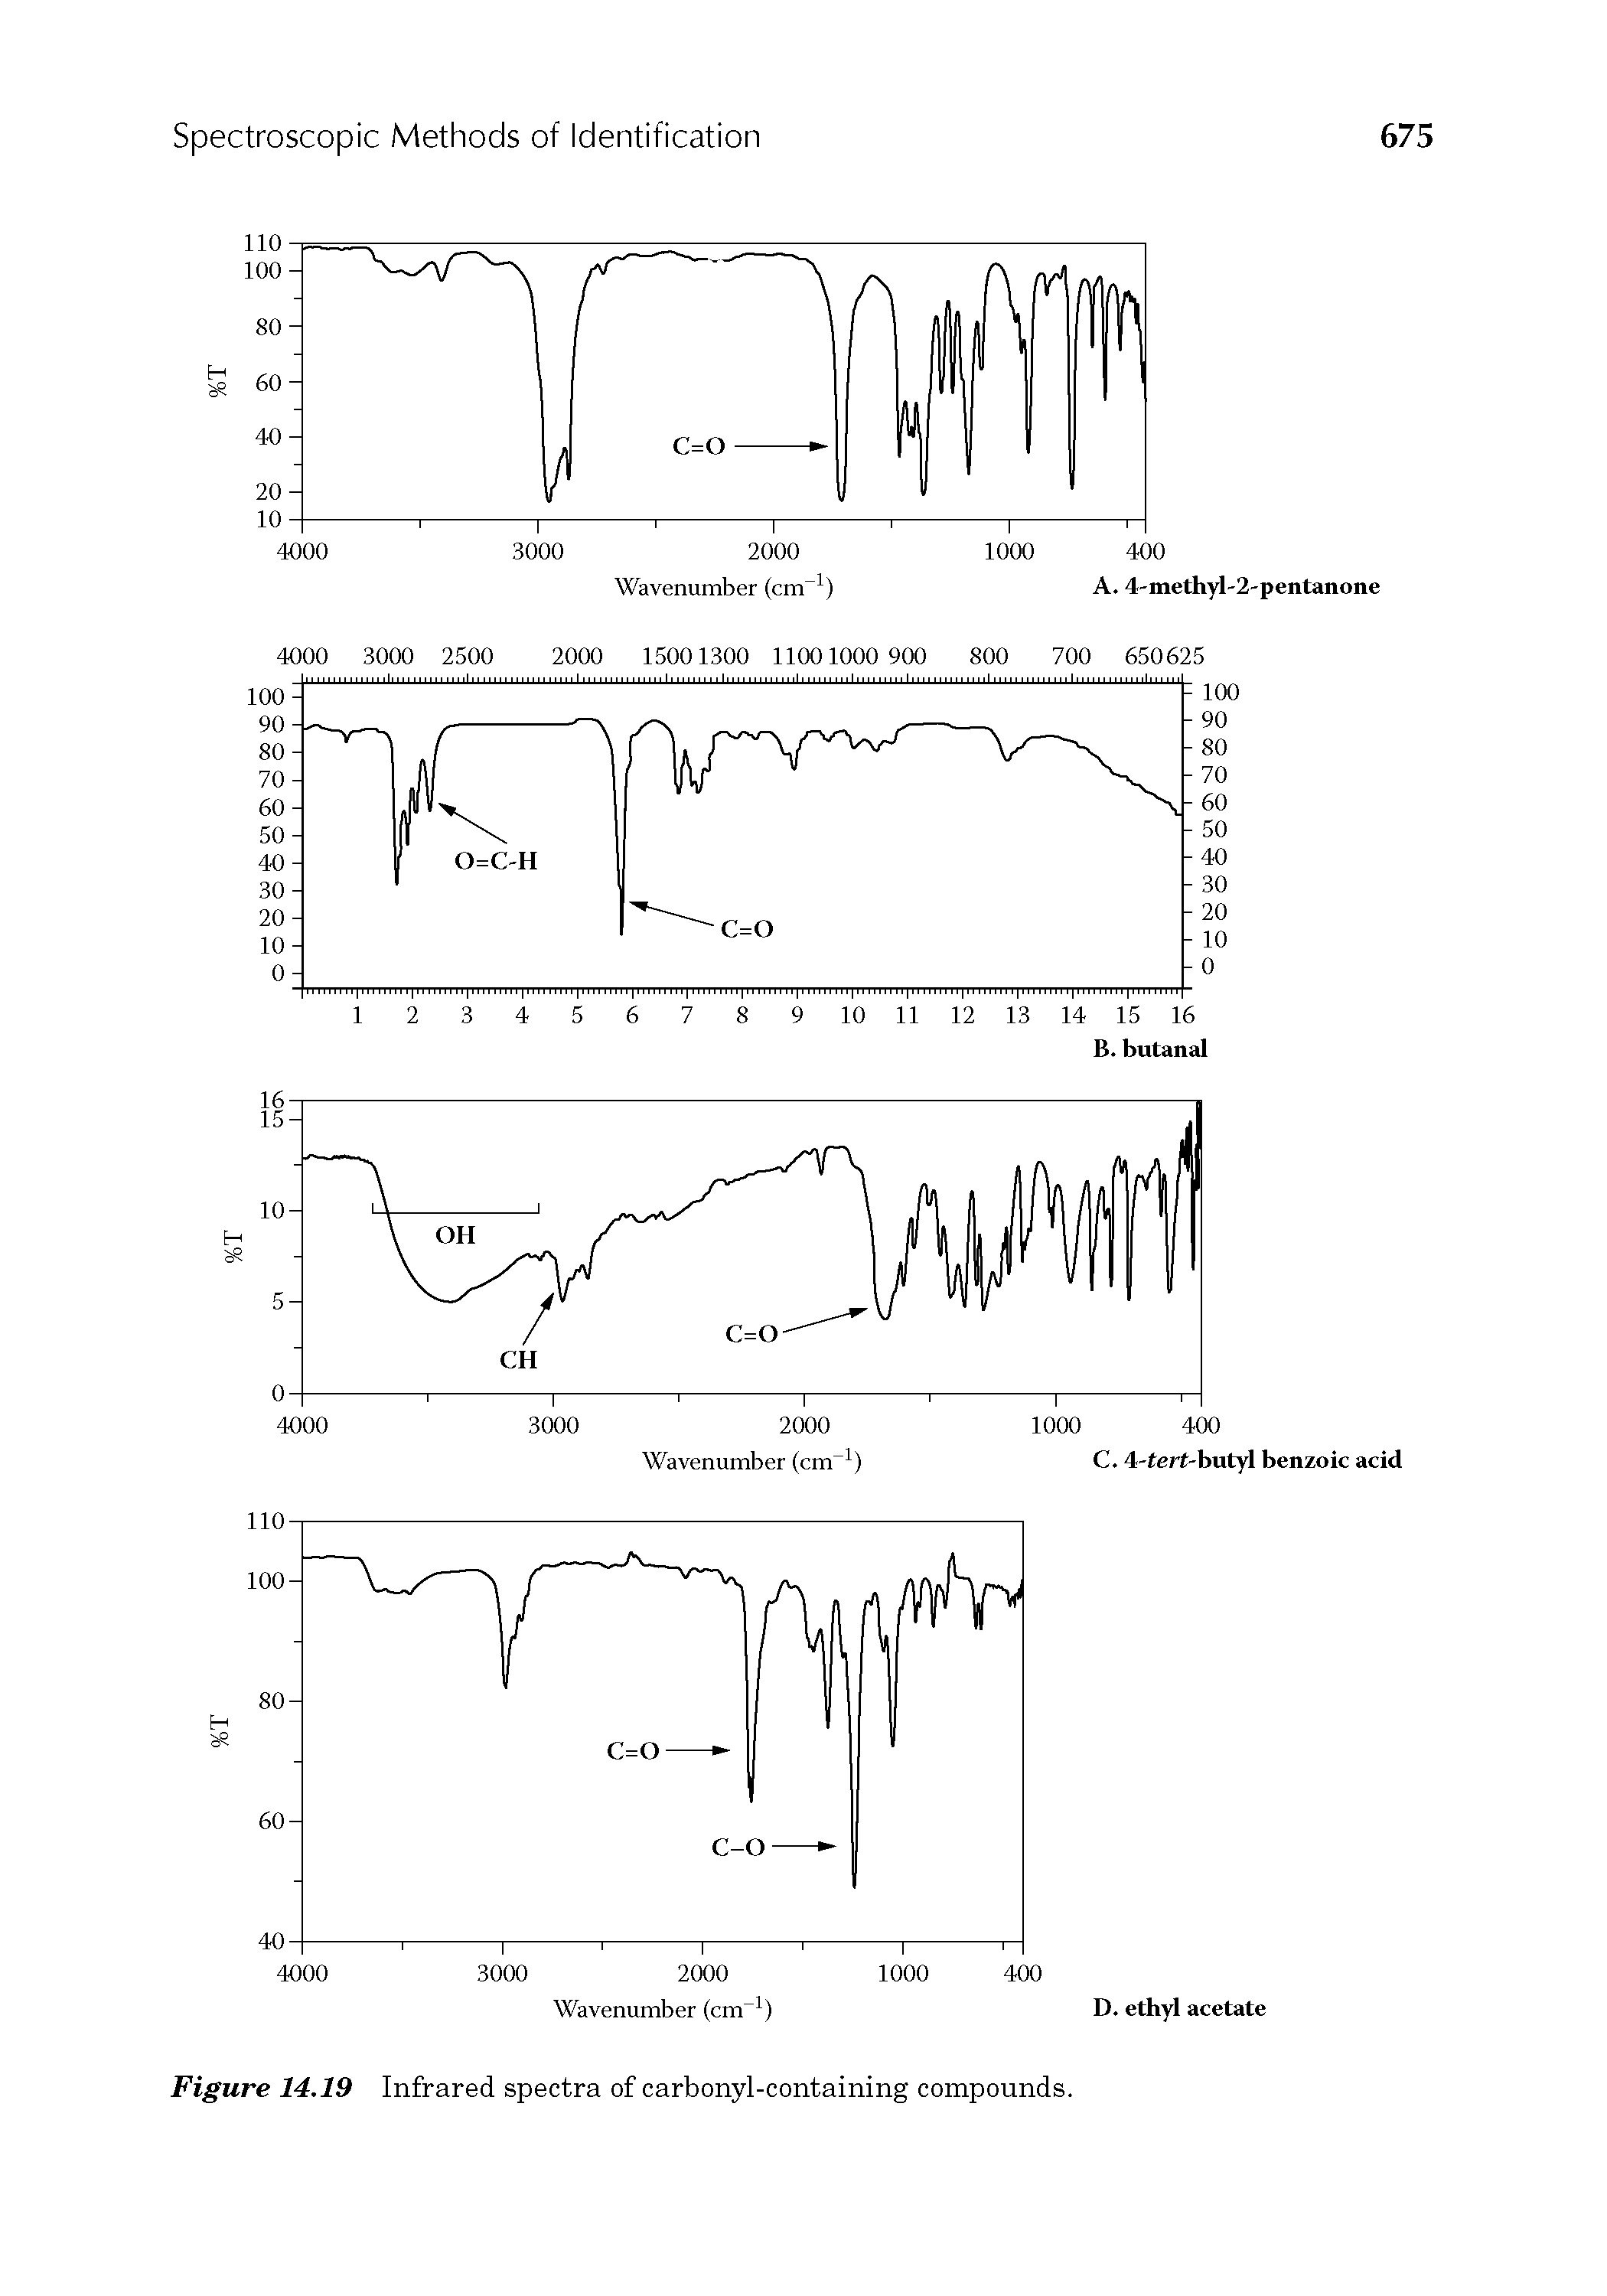 Figure 14,19 Infrared spectra of carbonyl-containing compounds.